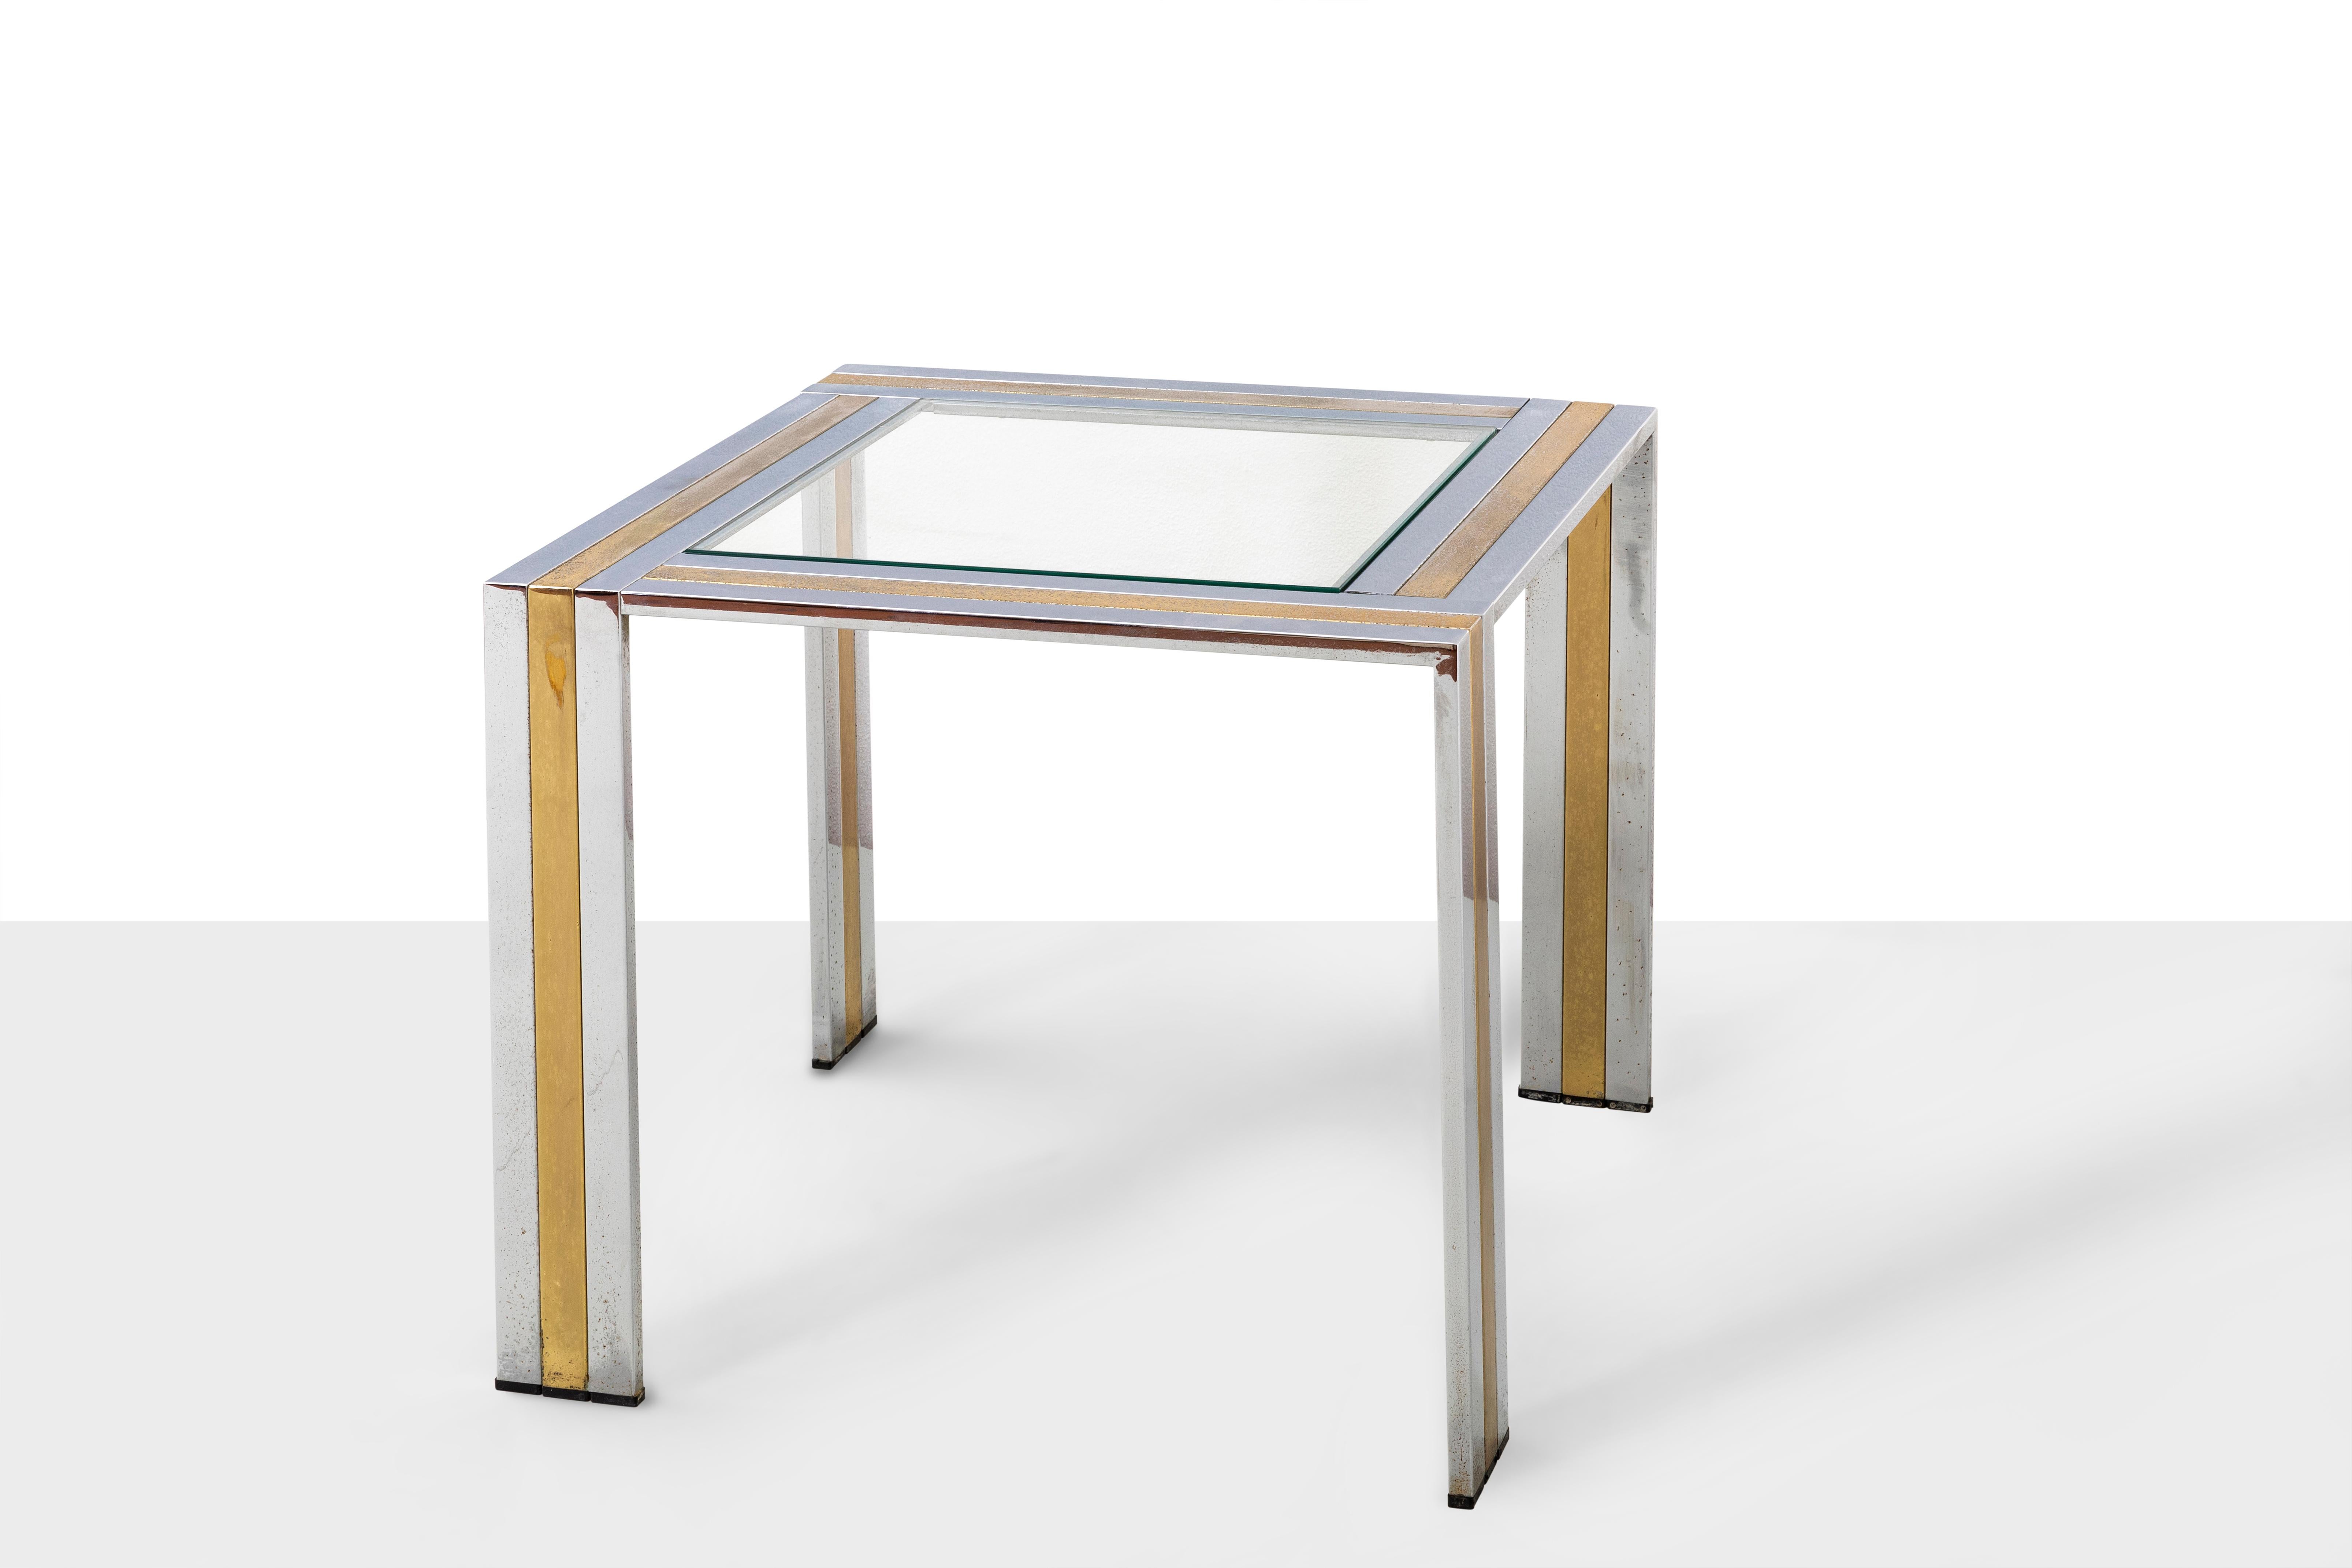 Romeo Rega Prod. Italy, c. 1970 Coffee table in brass and steel with ground glass top. Cm D 60, W 60, H 50 

Romeo Rega is born in Rome on 10 October 1925, third of six children, born and raised in the Trastevere district, in the heart of Rome.
THE